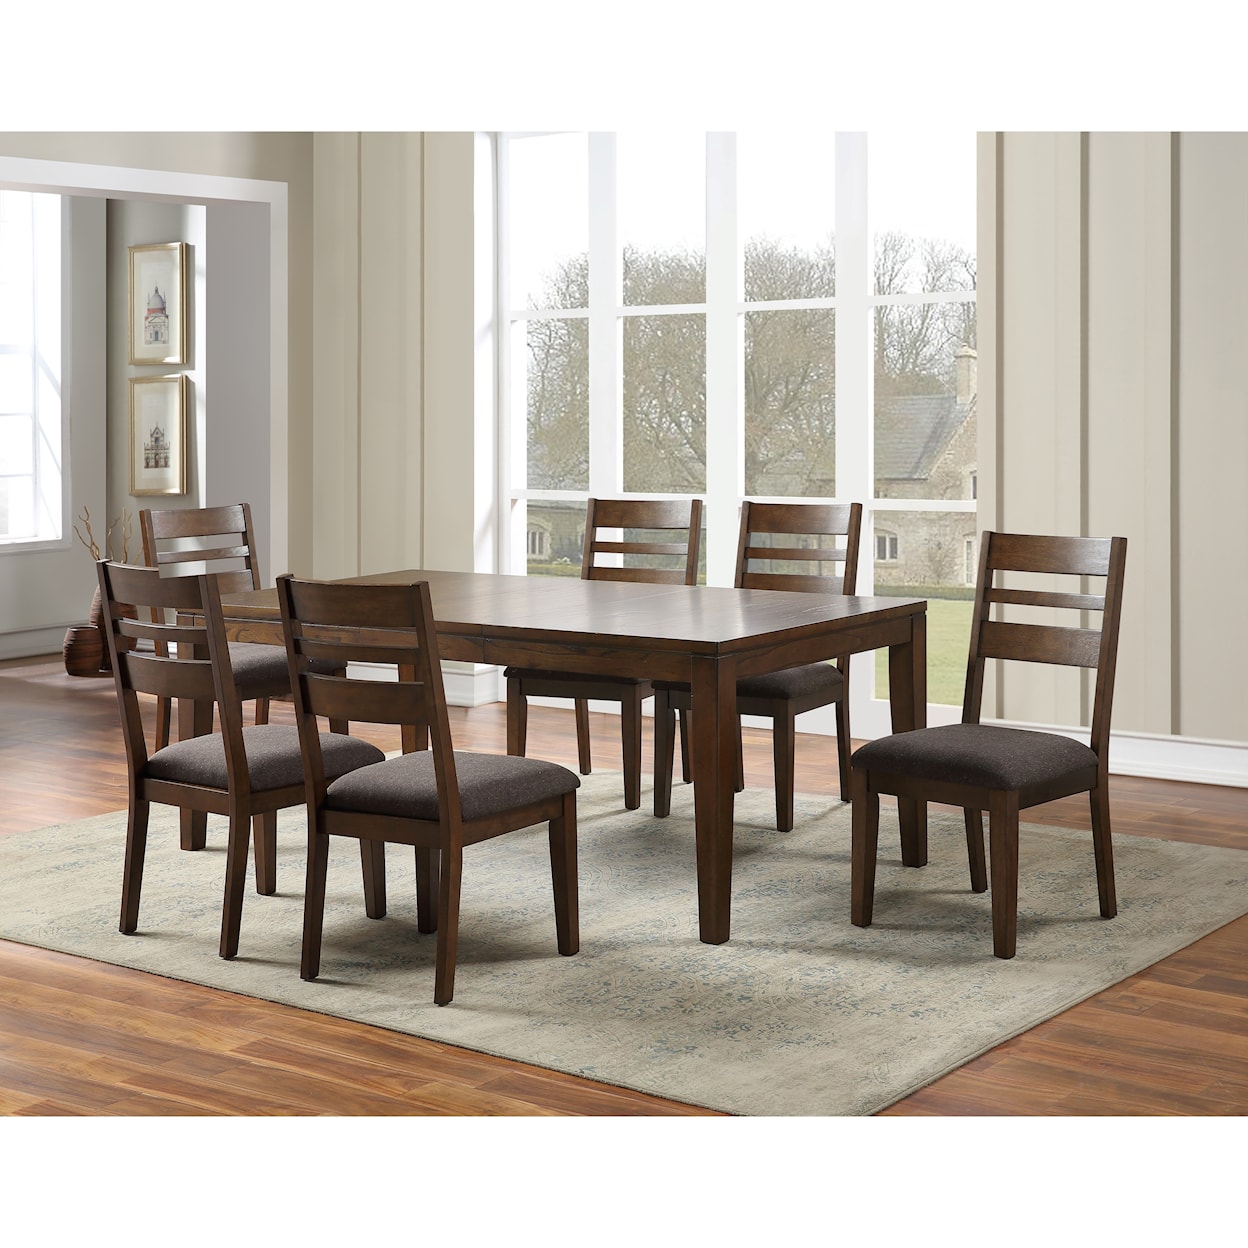 Steve Silver Stratford 7-Piece Table and Chair Set